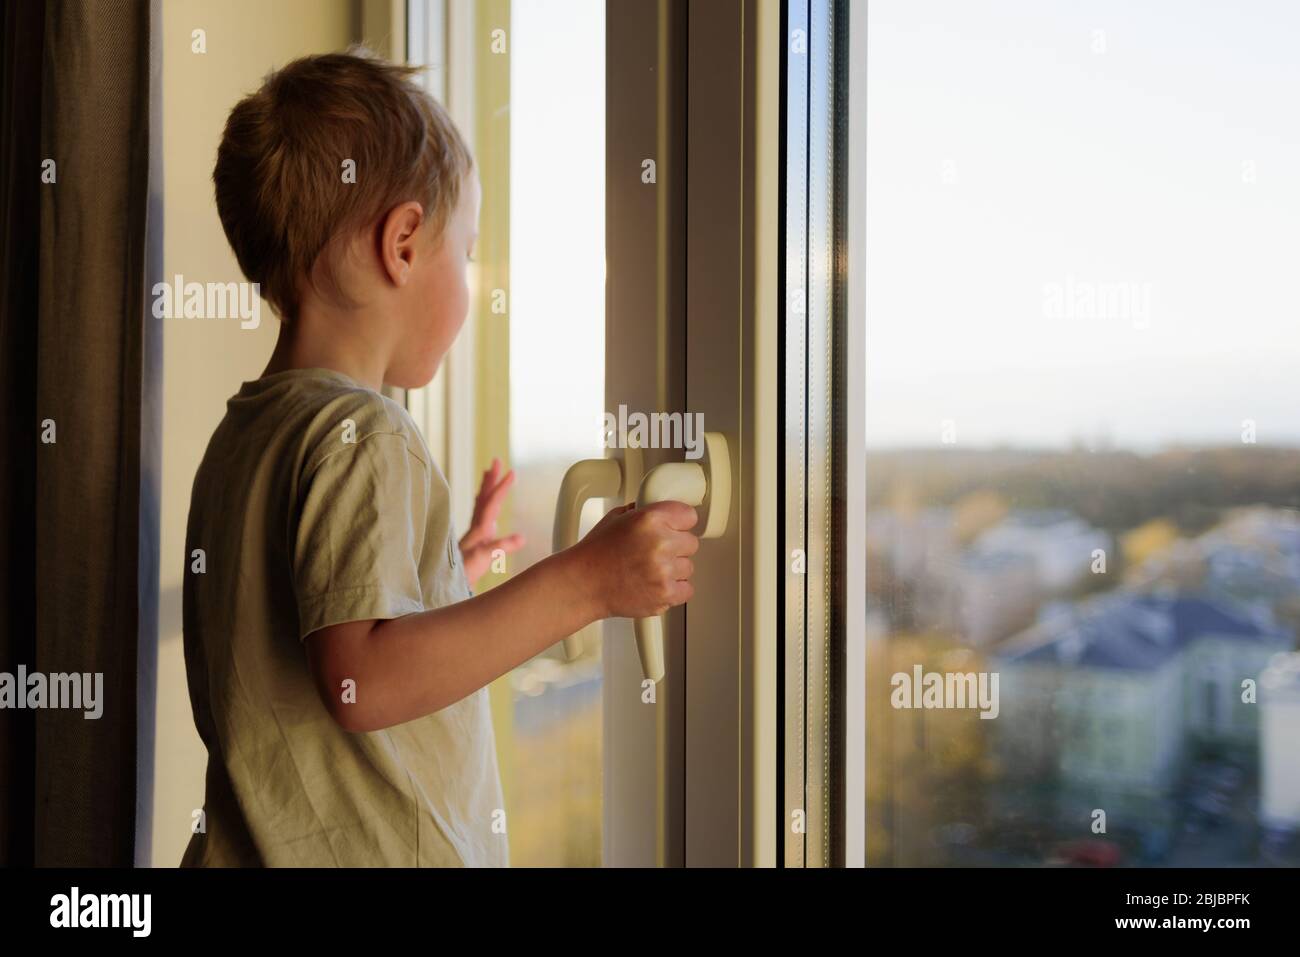 Boy looking through window to outside. Child opening window without parents. Dangerous situation Stock Photo